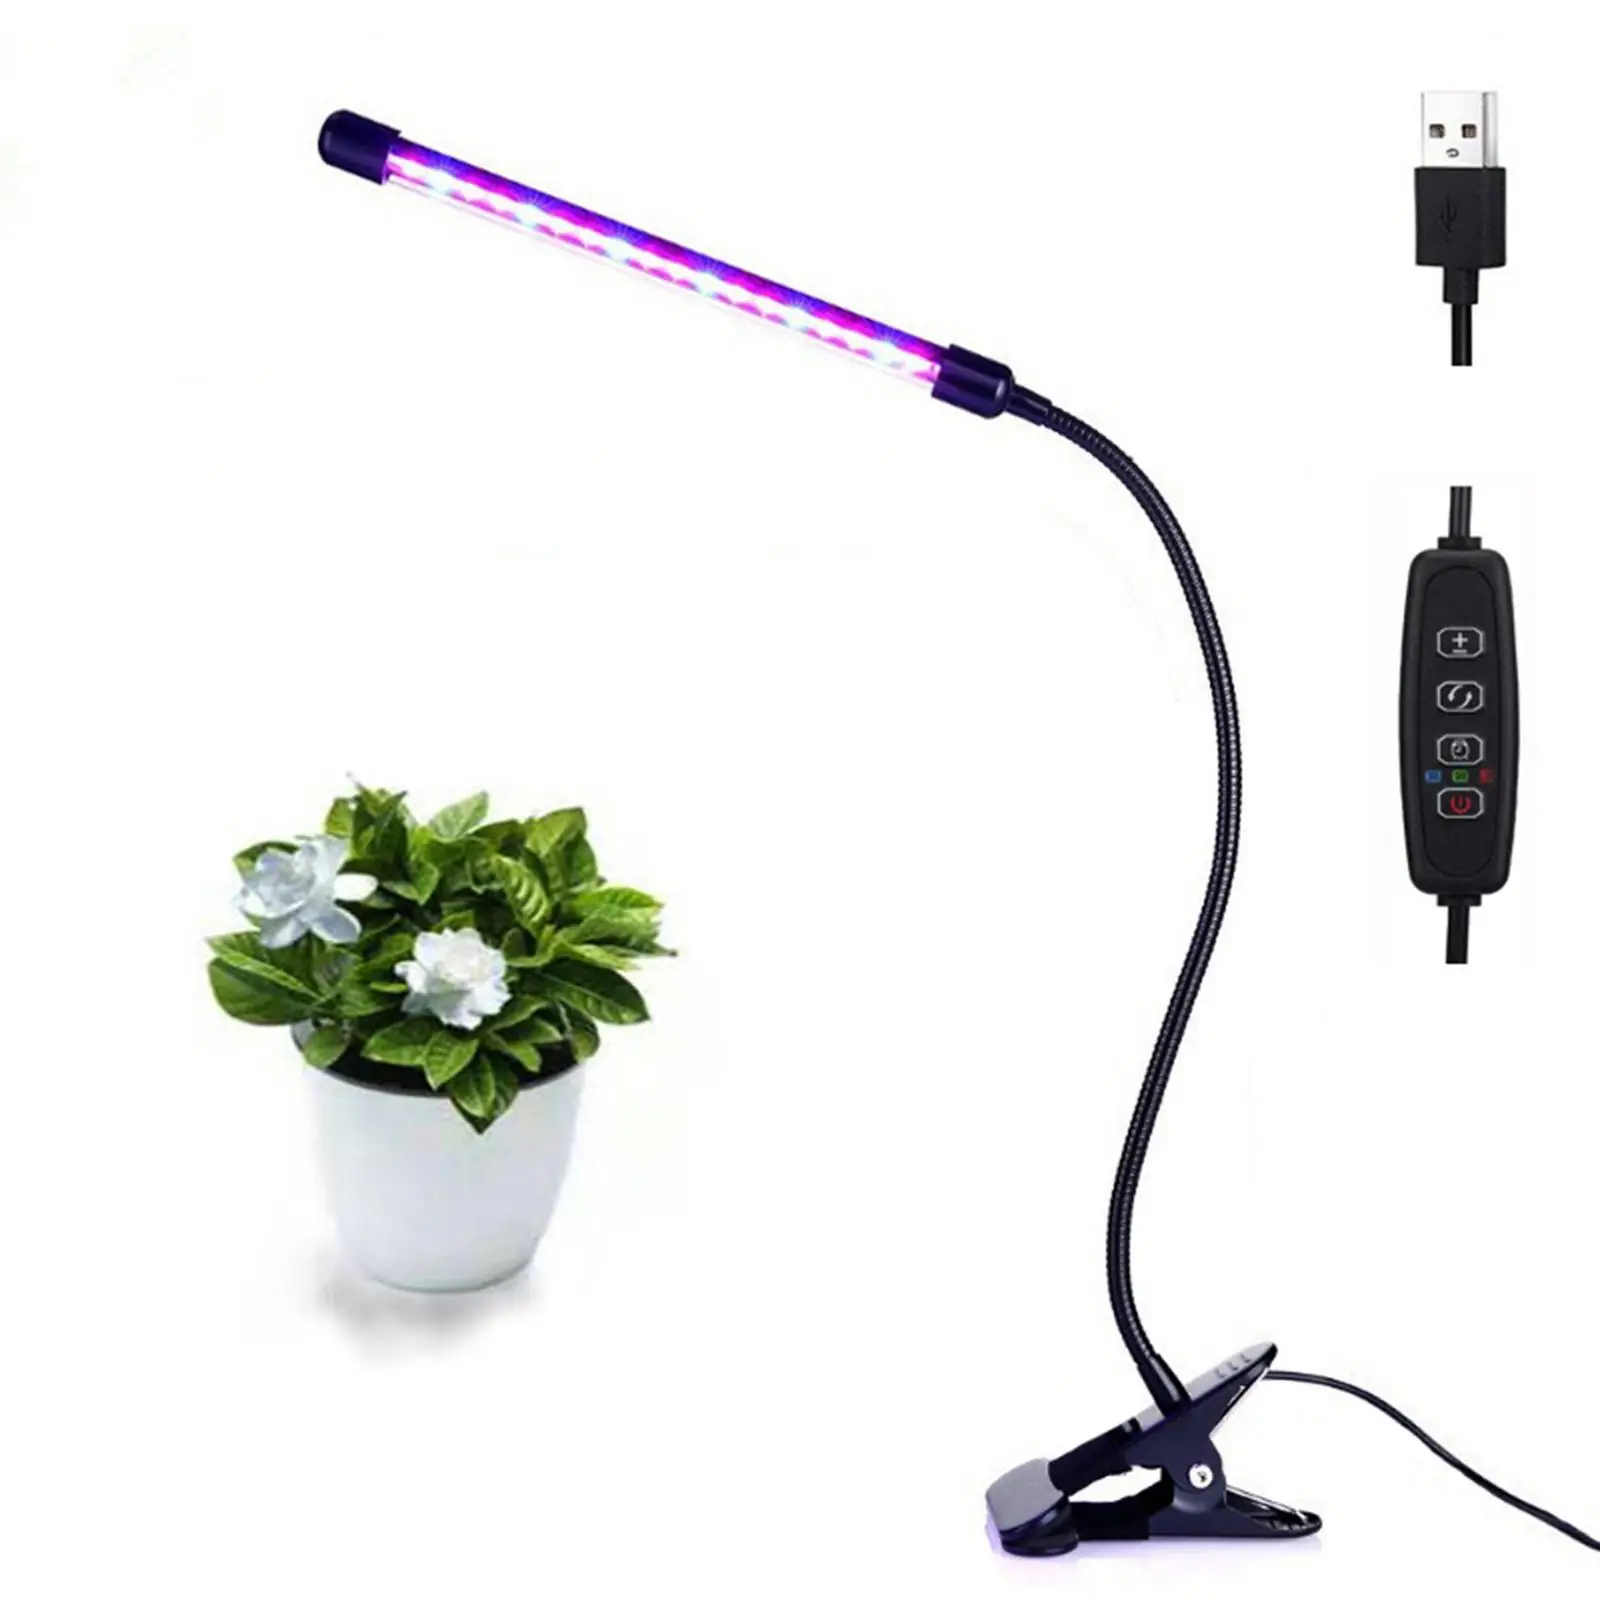 LED Grow Light Auto Off Timing 3 9 12Hrs Plants Growth Lamp for Seedling Planting Cultivation Vegetable Gardening Greenhouse